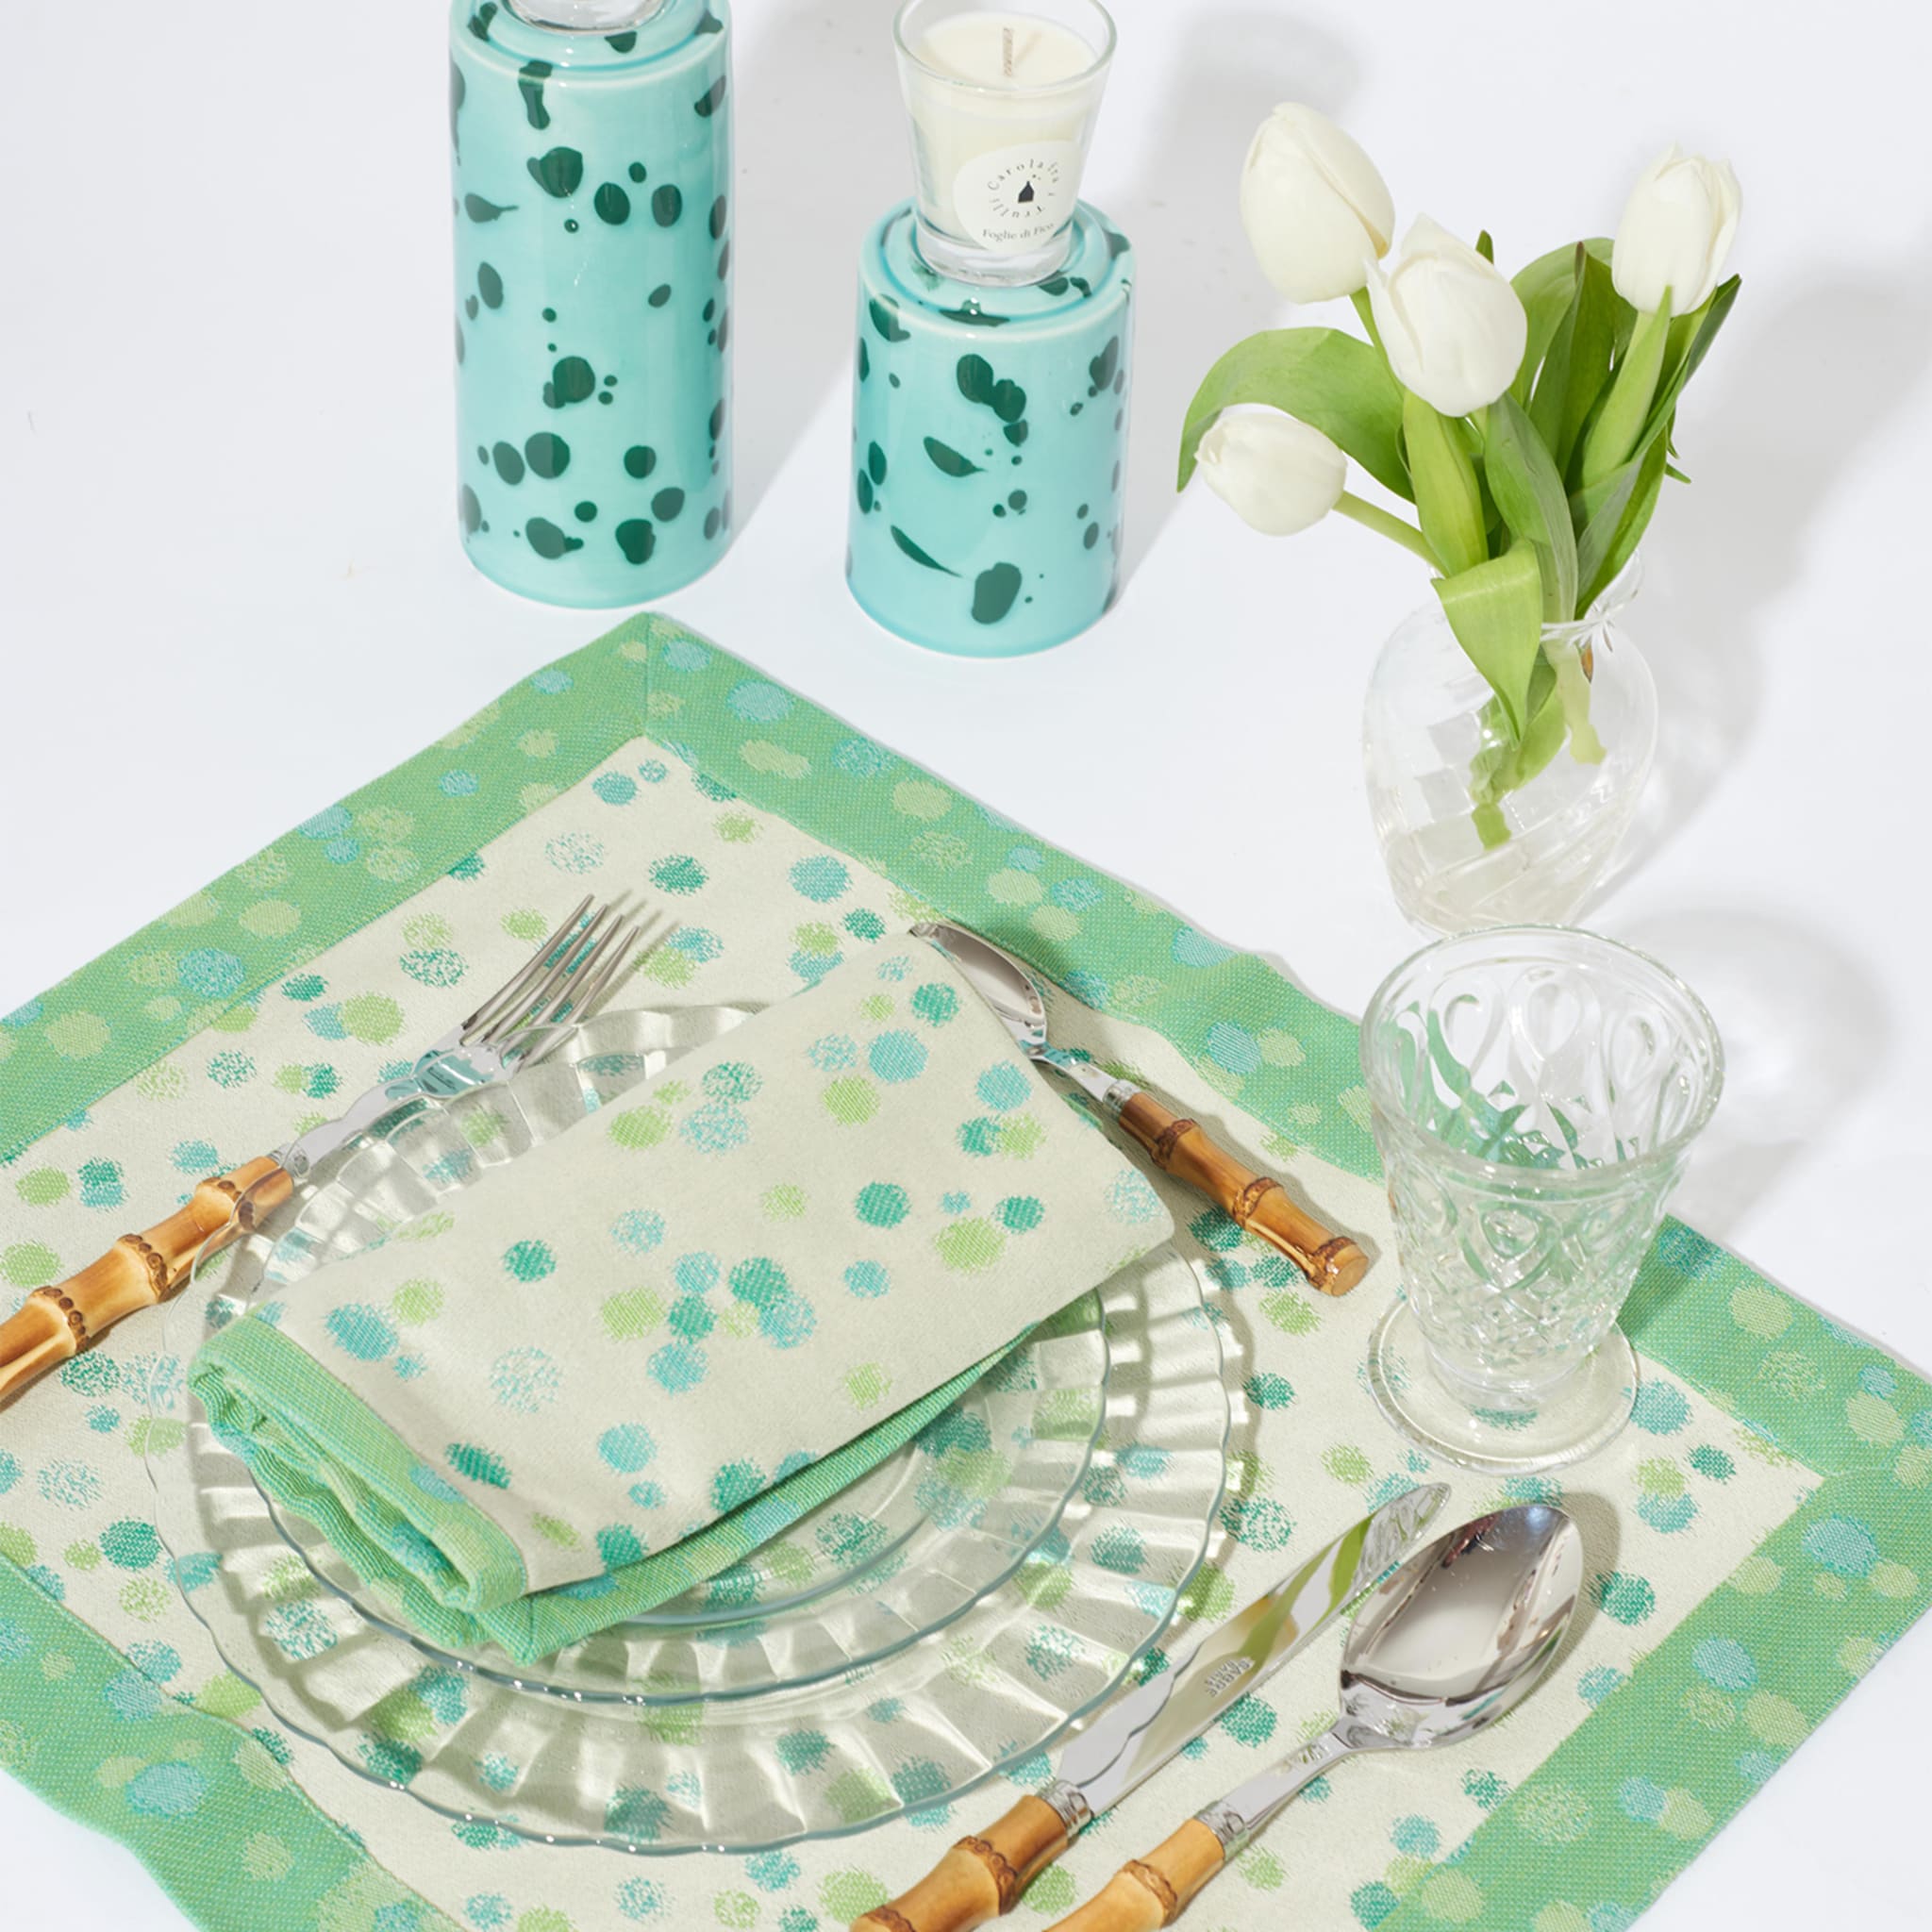 Aqua and Green Totem with Scented Candle Fragrance Foglie di Fico - Alternative view 1